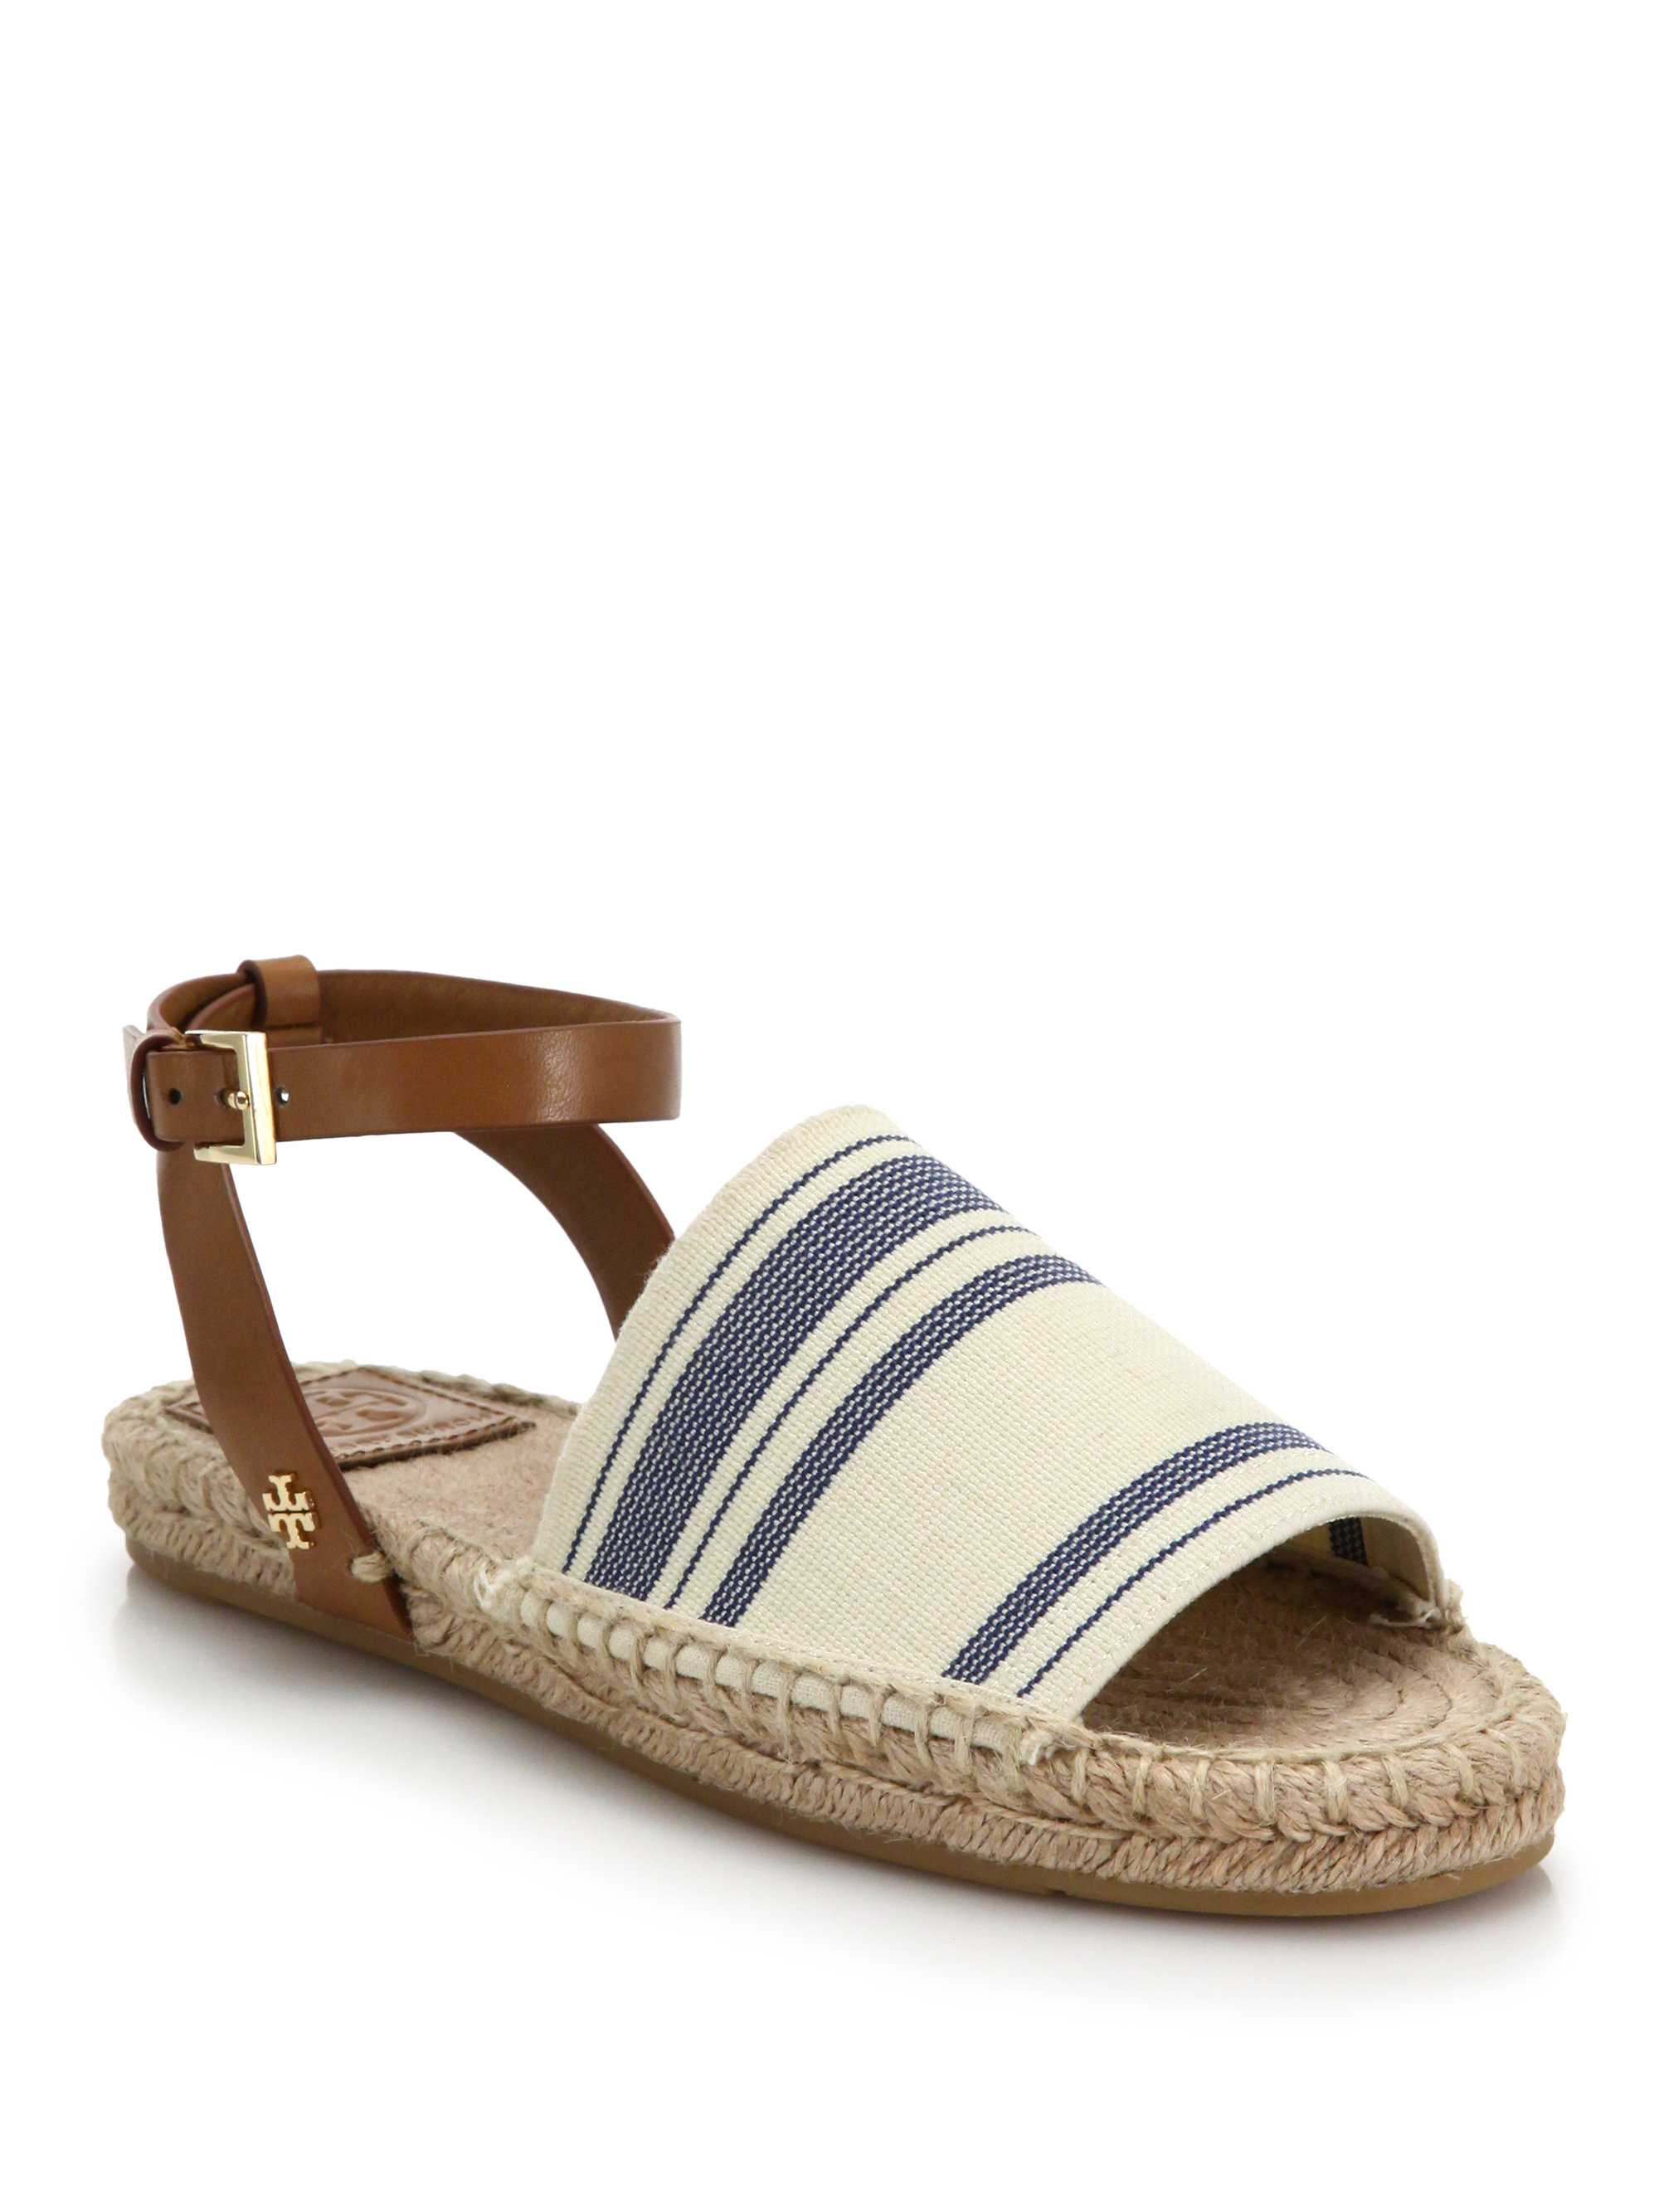 Lyst - Tory Burch Leather & Striped Woven Espadrille Sandals in Natural